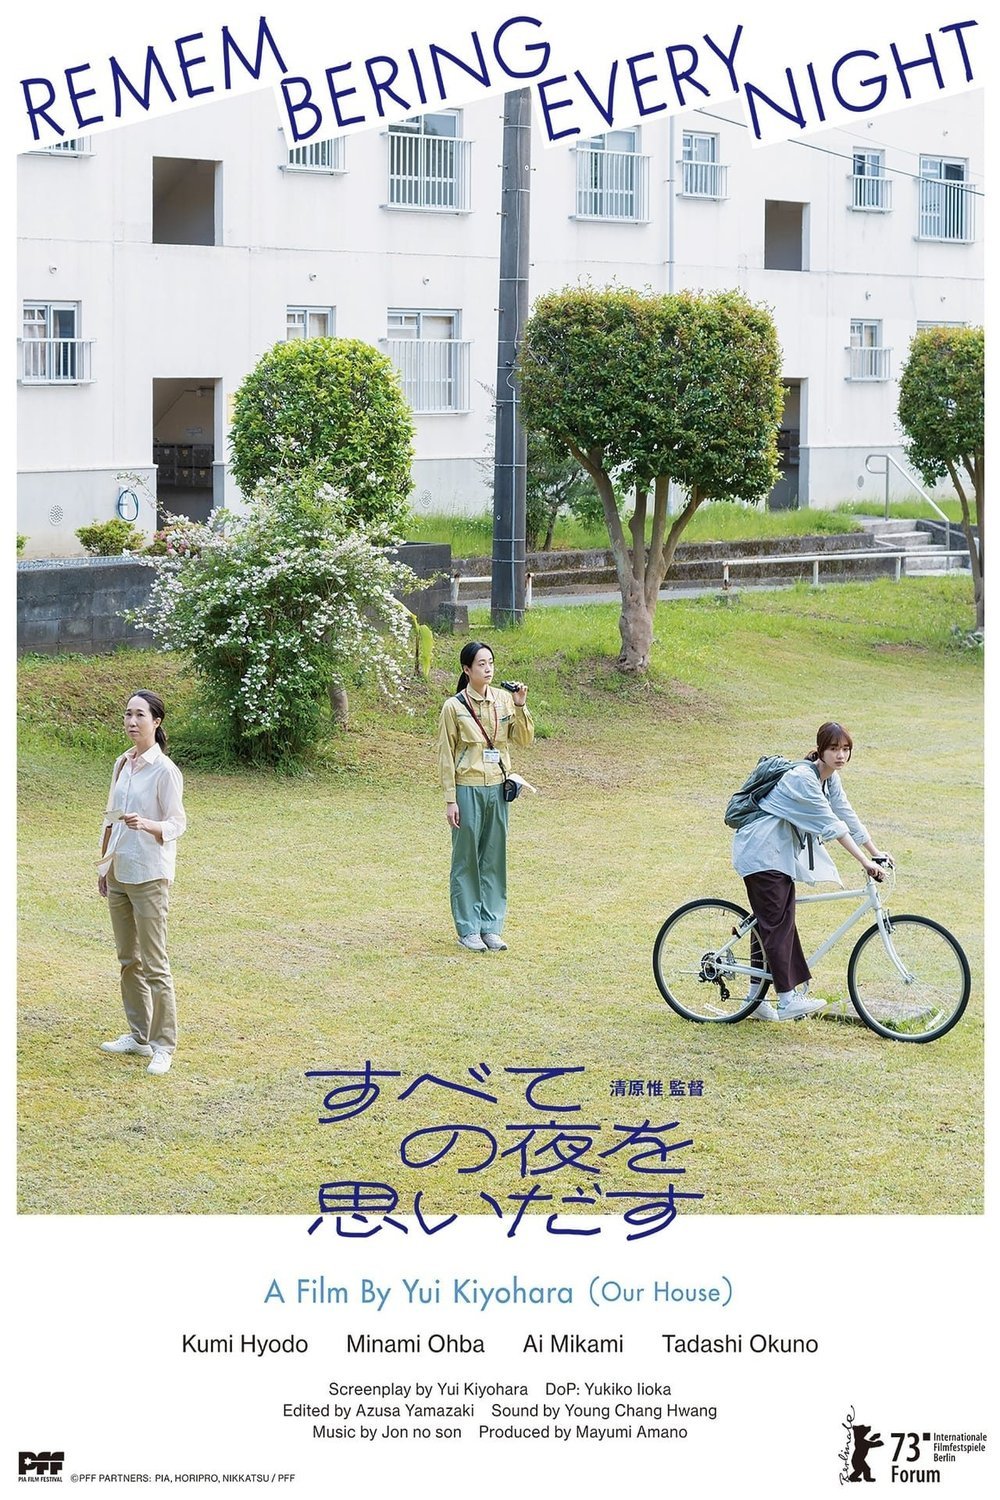 Japanese poster of the movie Remembering Every Night